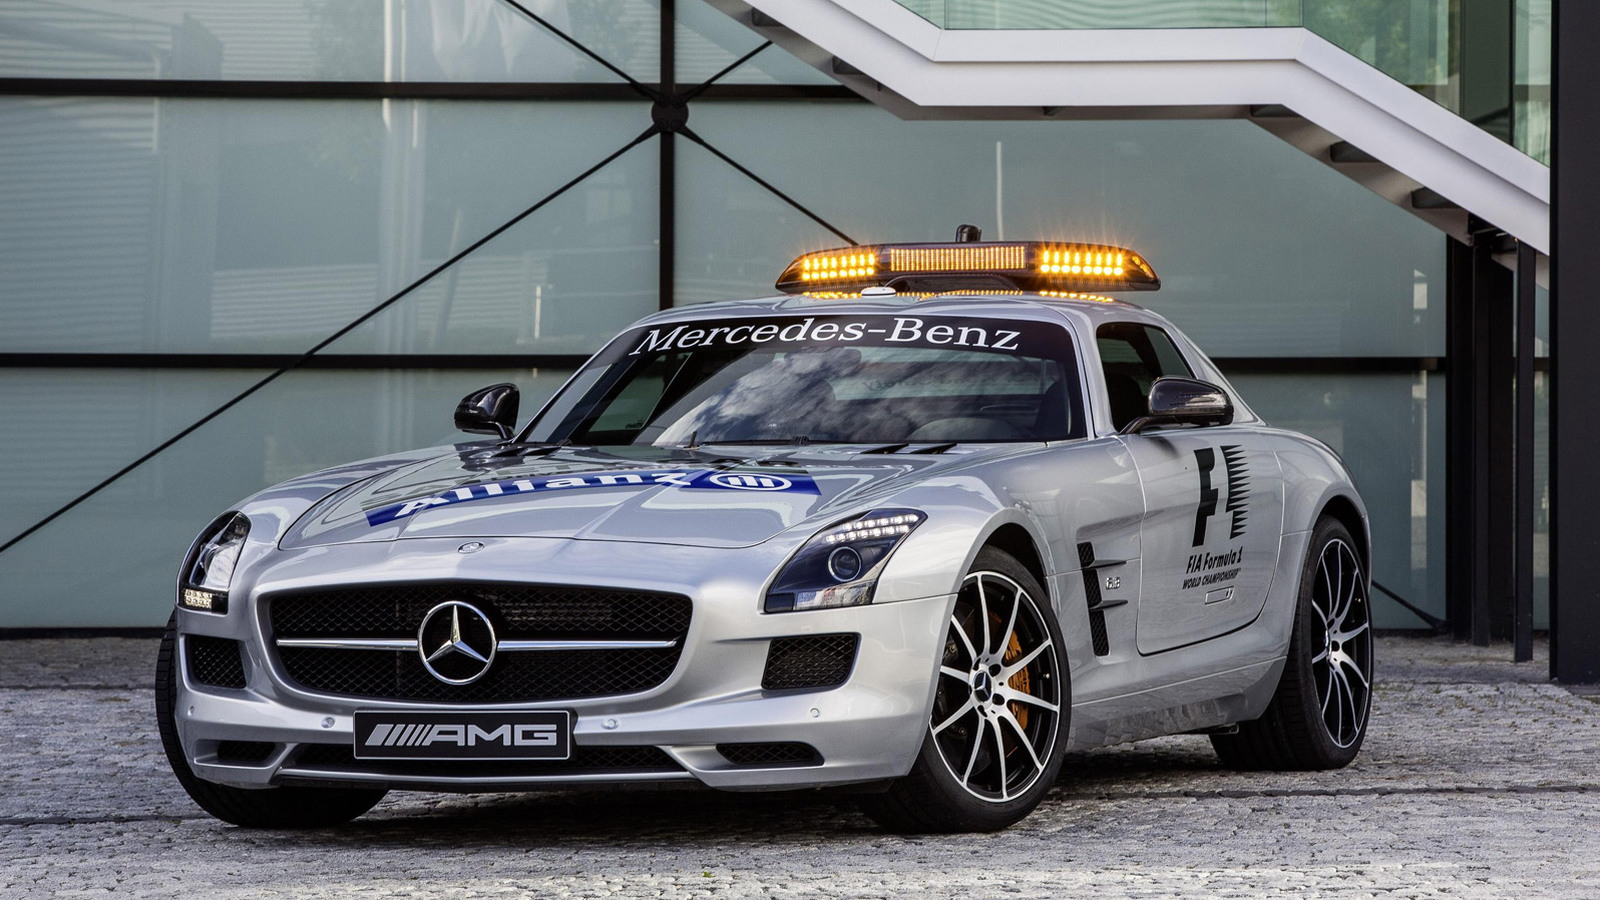 Mercedes-Benz SLS AMG GT is the official safety car for the 2012 Formula 1 season